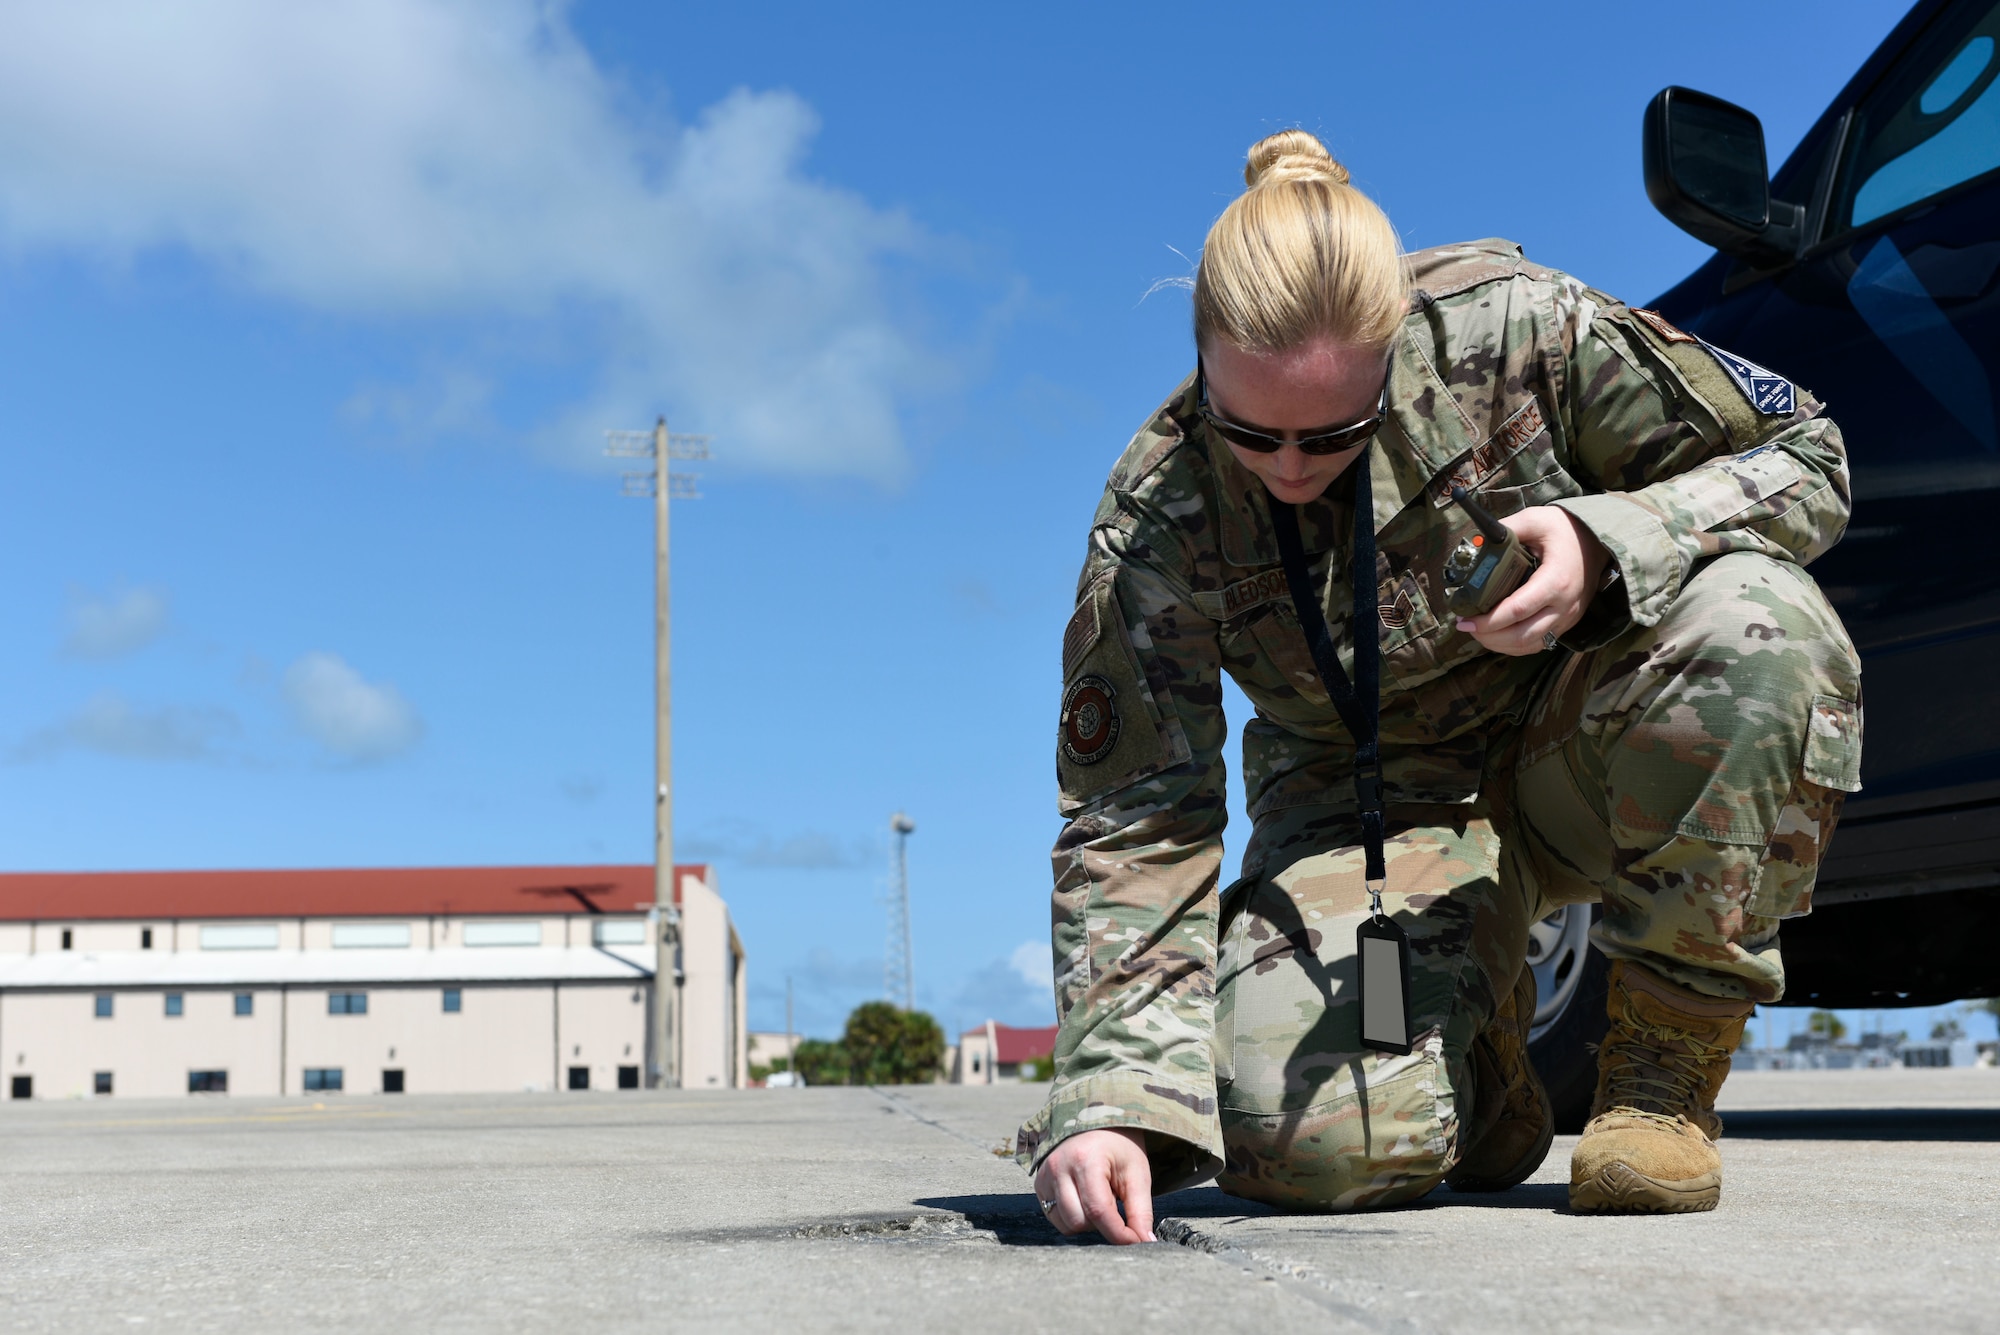 Tech. Sgt. Marlena Bledsoe, 45th LRS noncommissioned officer in charge of airfield management training, removes a piece of debris on the Flightline during an inspection of the airfield, on Oct. 12, 2021. Removing Foreign Object Debris is a vital part of securing the safety of the runway. Photo altered for security purposes (U.S. Space Force Photo by Airman 1st Class Samuel Becker)